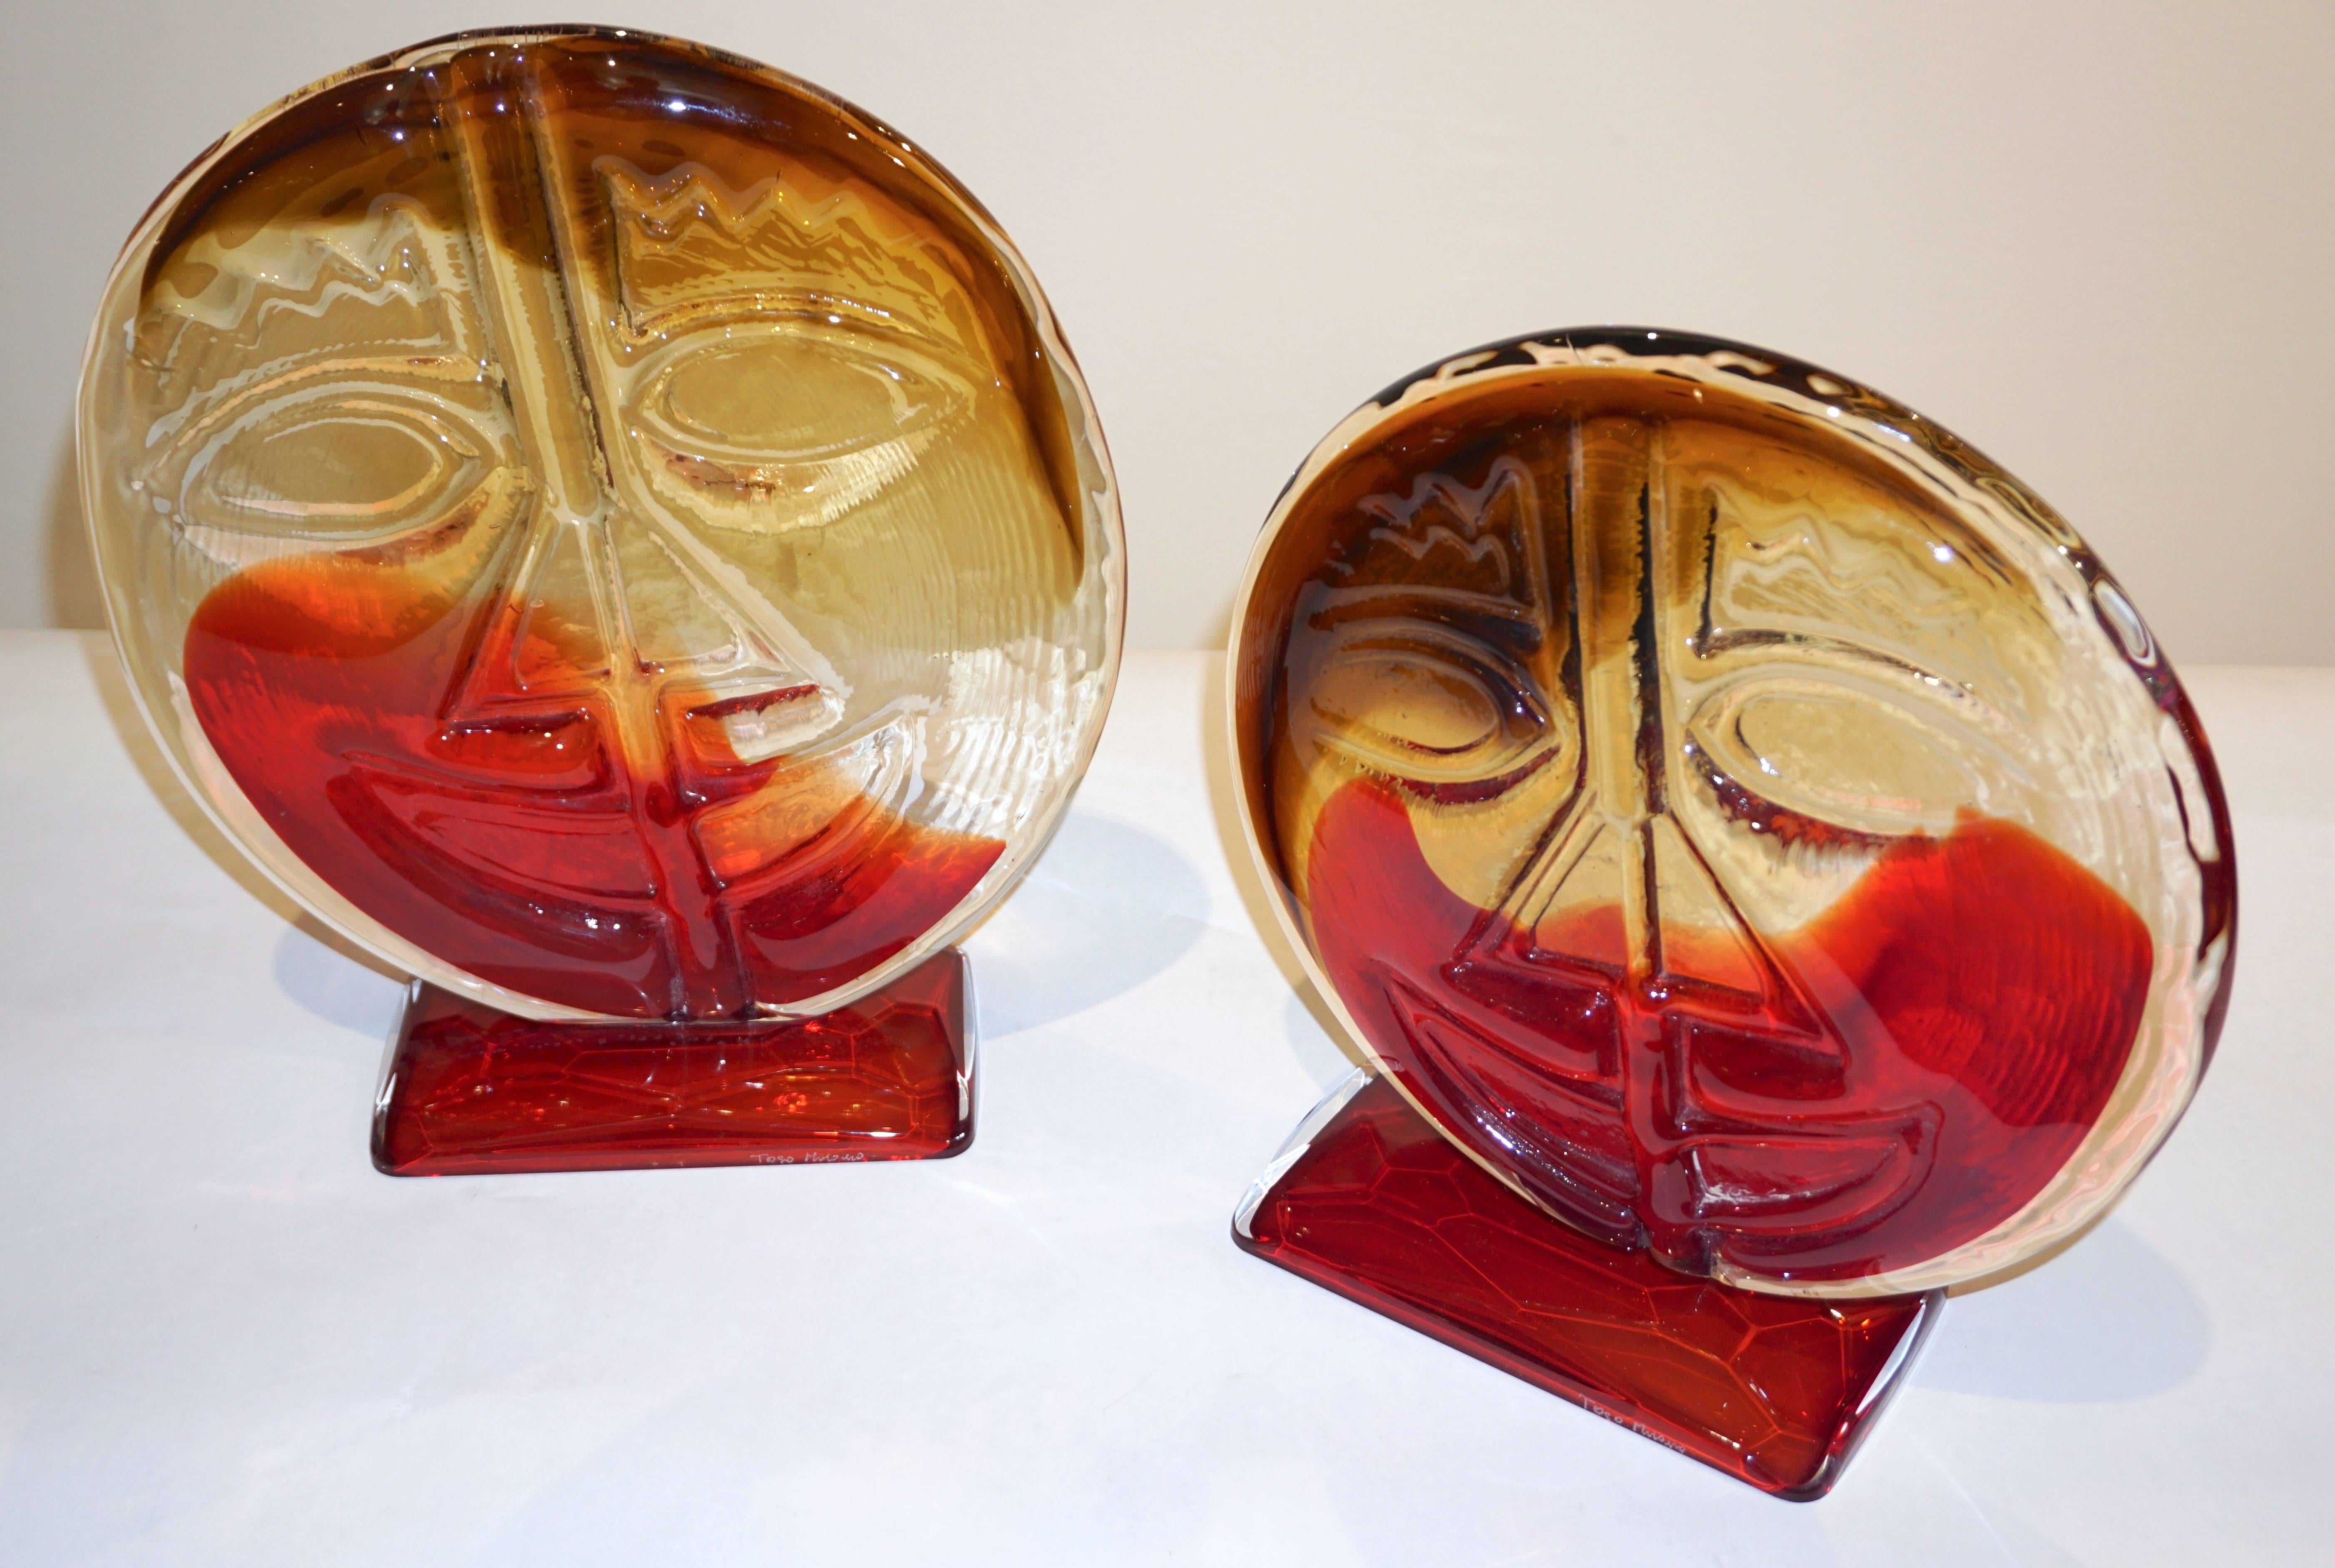 These fun Picasso style Italian decorative faces in Murano Art glass present high quality of Design and execution, the crystal clear Murano glass is worked with bursts of red and yellow, amber colors, the front decorated with an abstract cubist